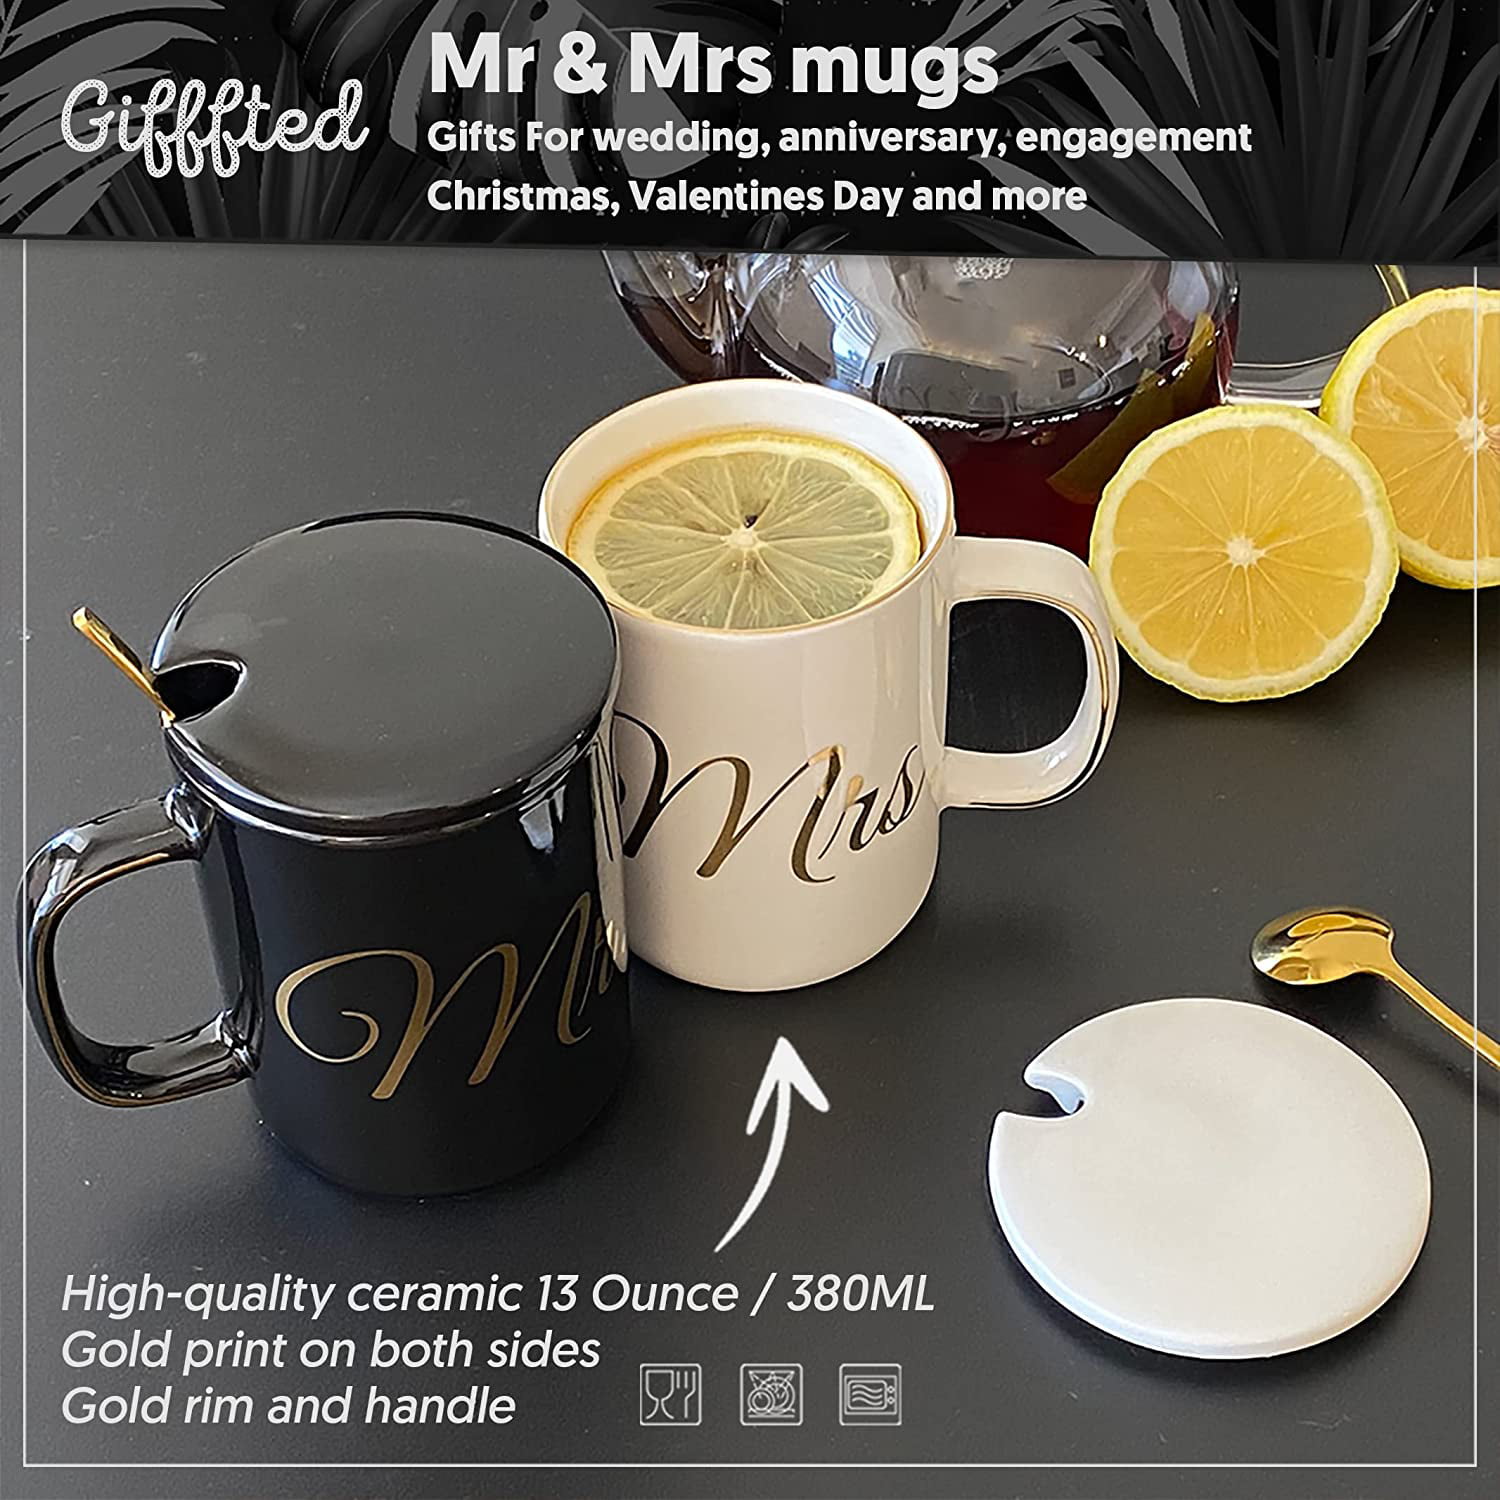 Bulk 144 Ct. Mr. & Mrs. Wedding Paper Coffee Cups with Lids